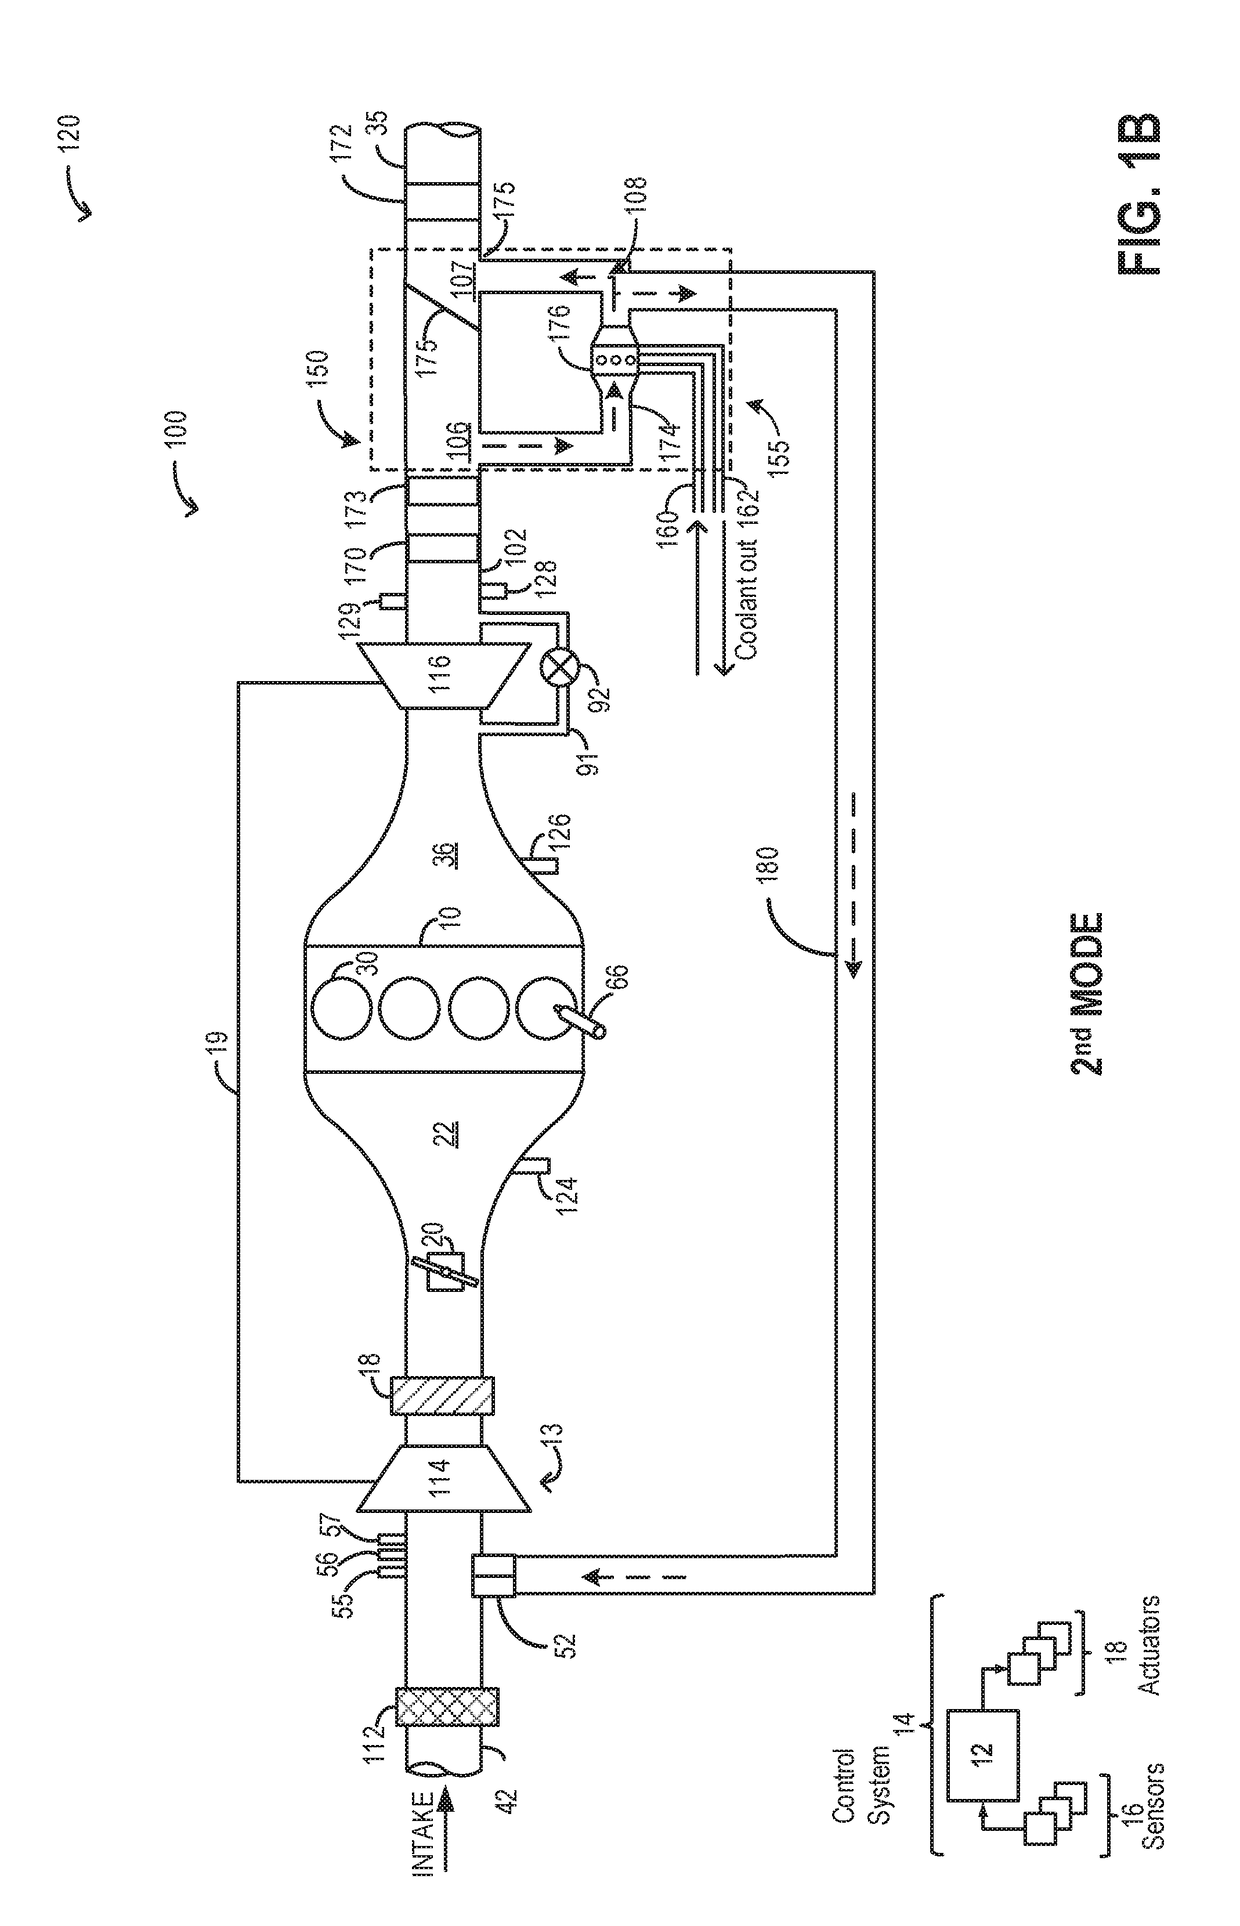 Method and system for exhaust gas recirculation and heat recovery